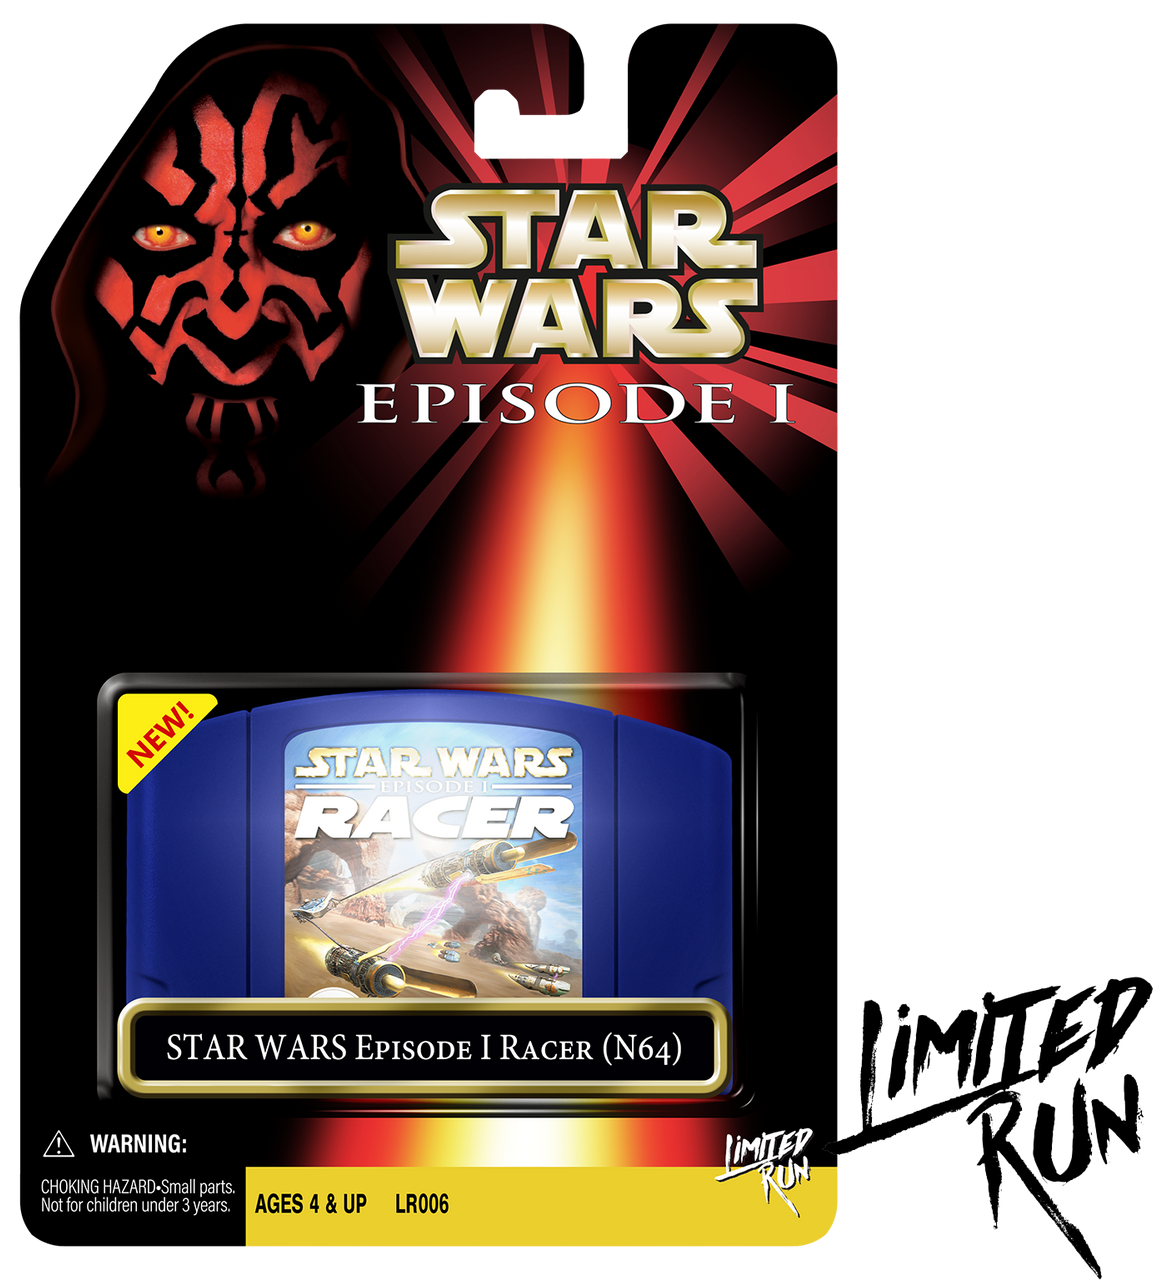 Star Wars Episode I: Racer Classic Edition (Nintendo 64) Limited Run